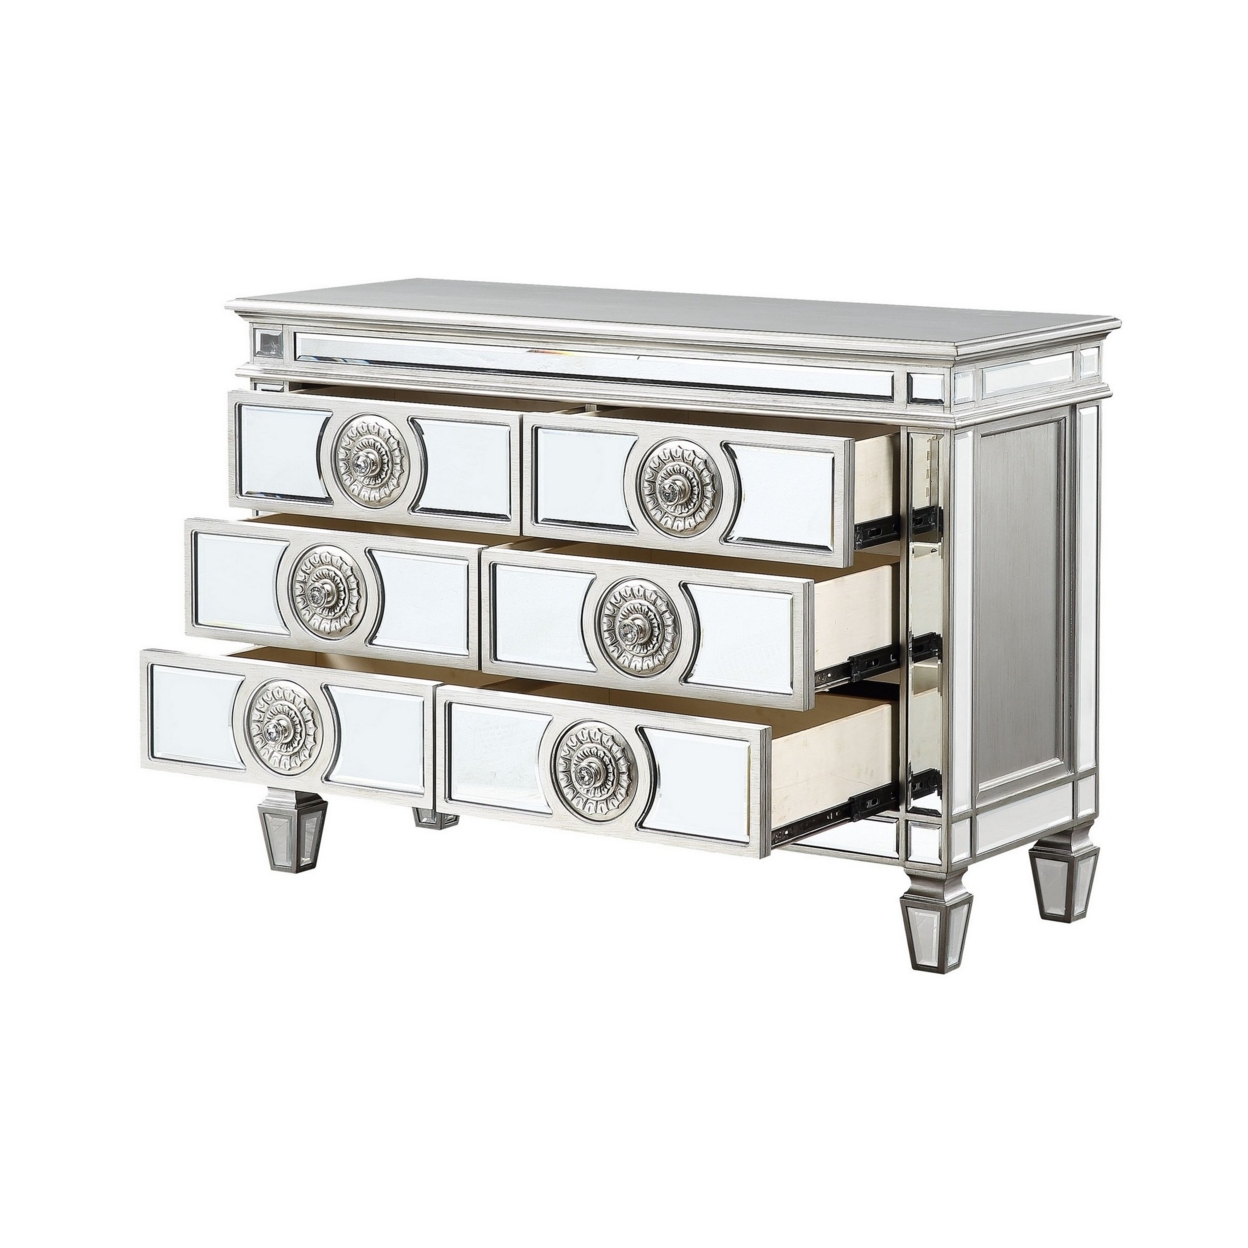 Server With 6 Mirrored Drawers And Medallion Front, Silver- Saltoro Sherpi